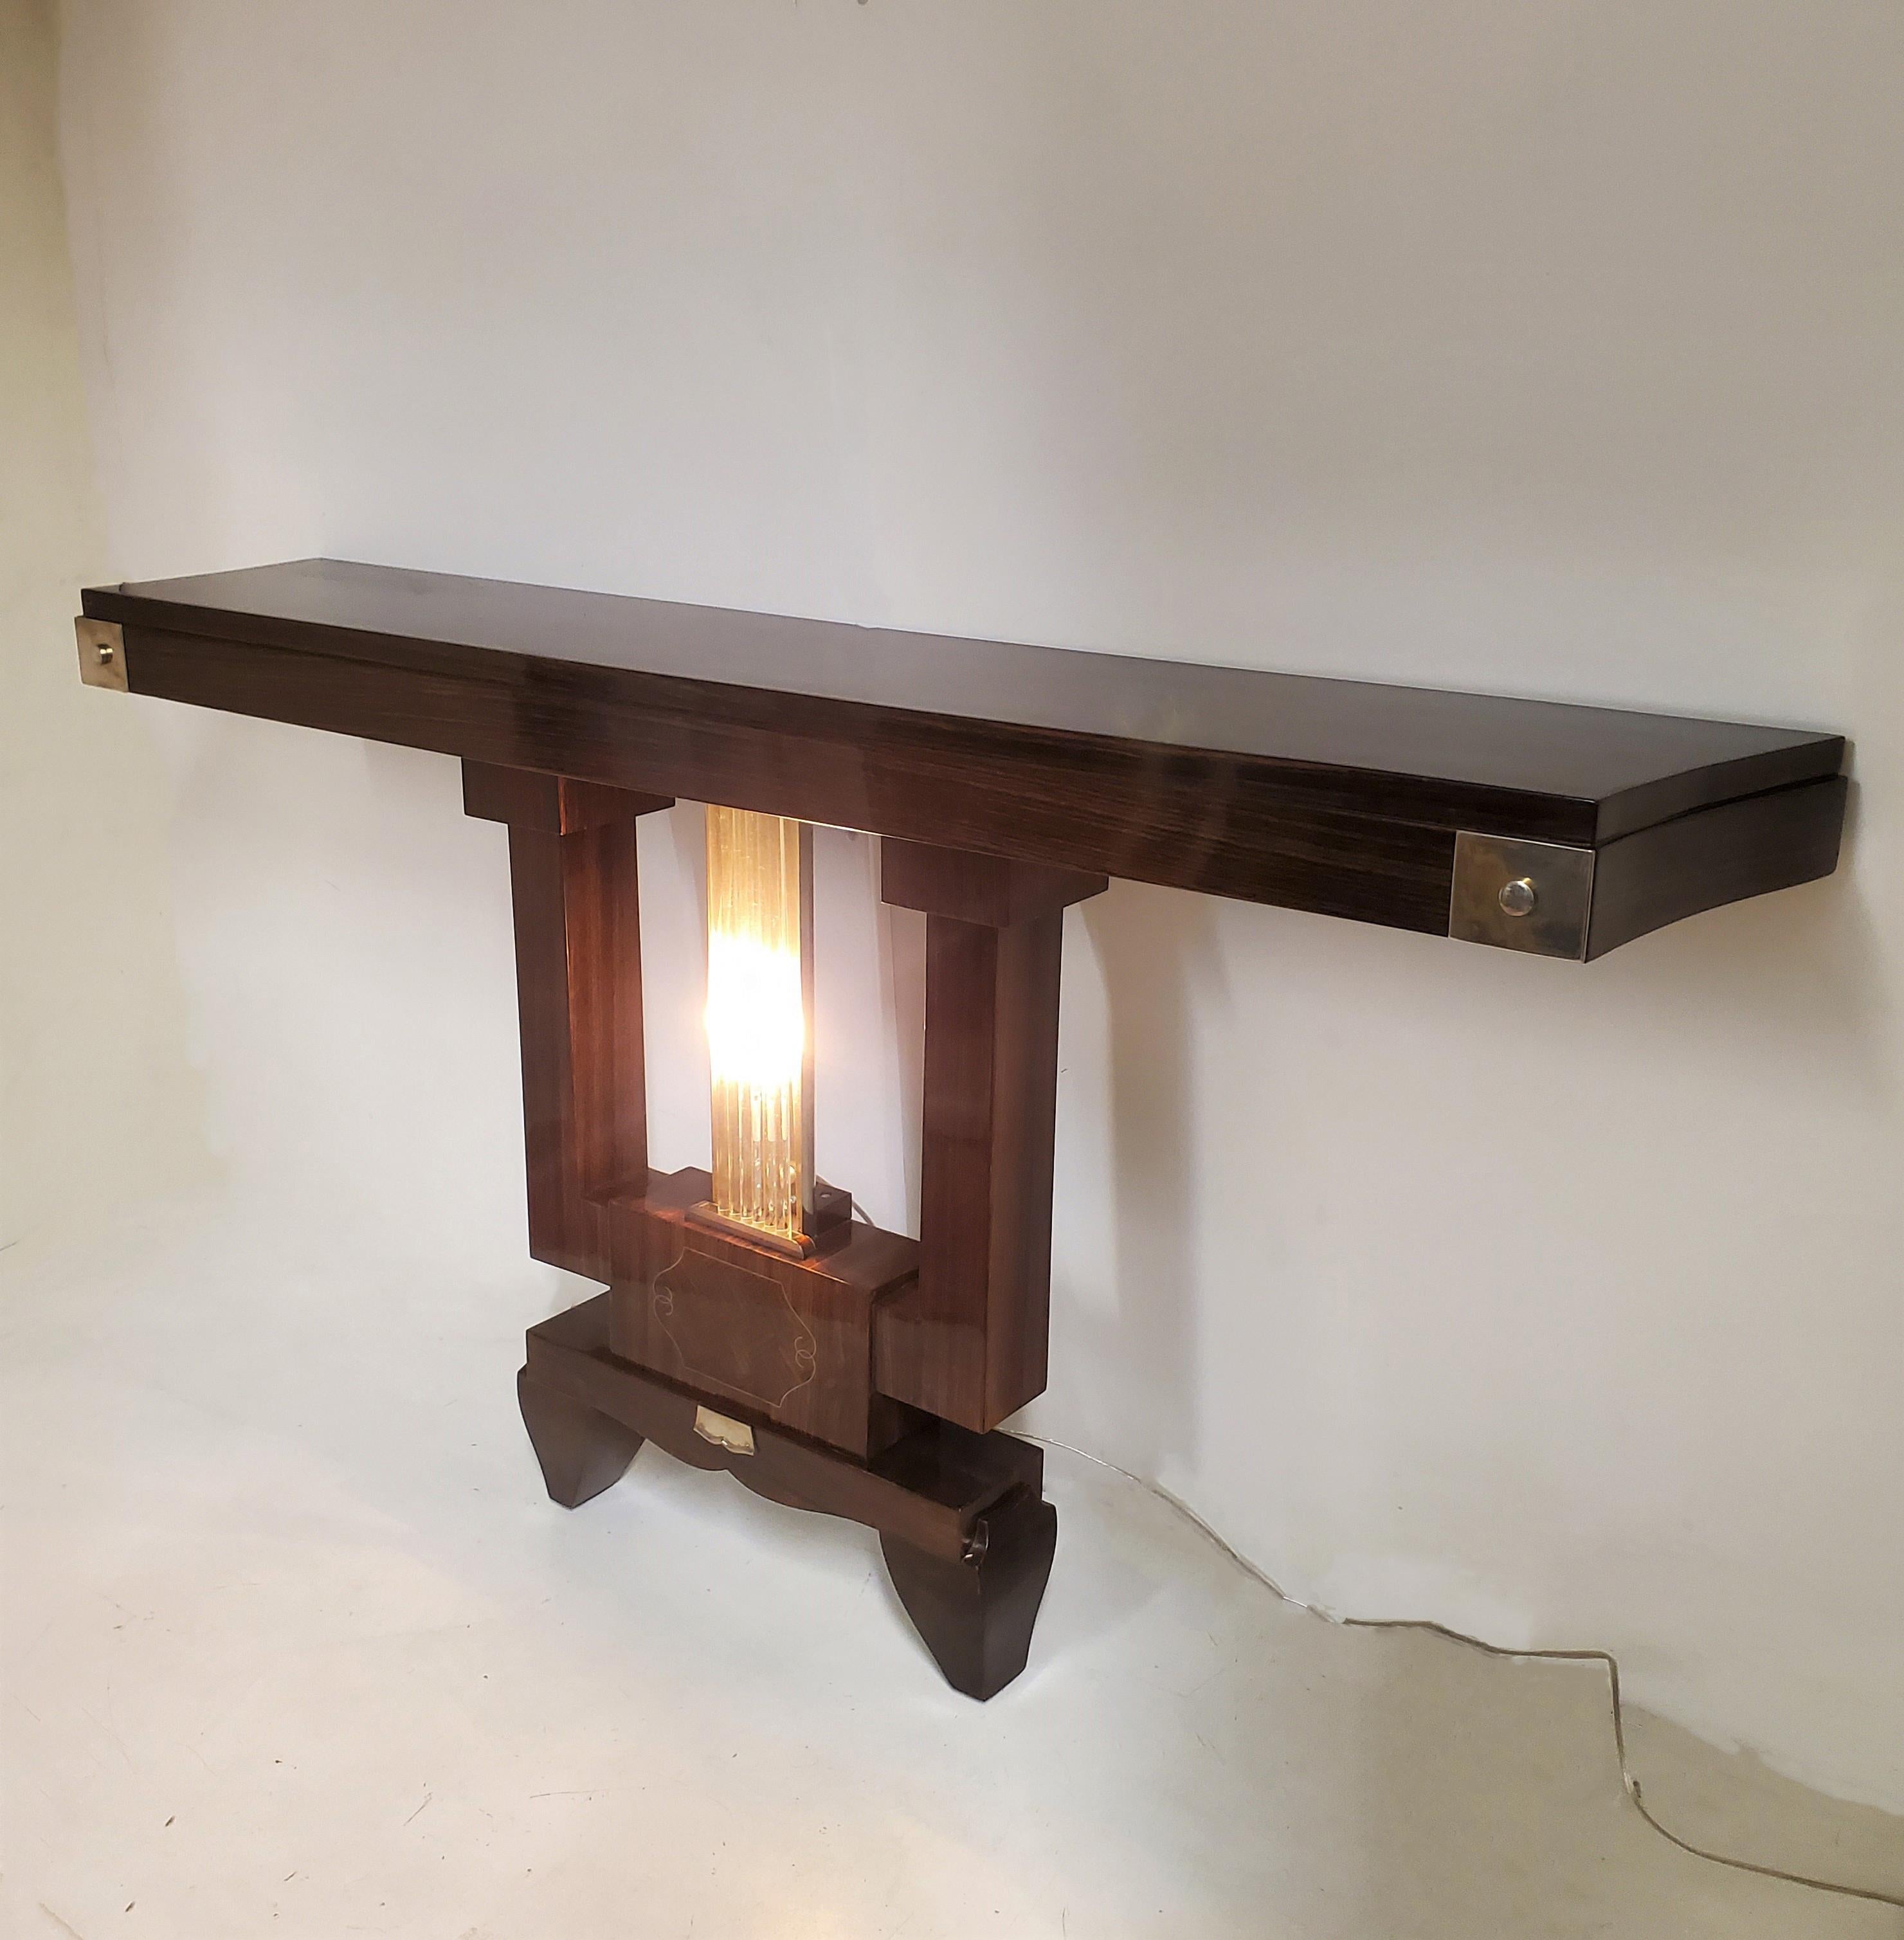 Price listed is per single console. A pair is available.
Exquisite French Art Deco highly architectural console table in palisander, characterized by its open cube structure and a striking central focus of illuminated glass rods. 
The rectangular